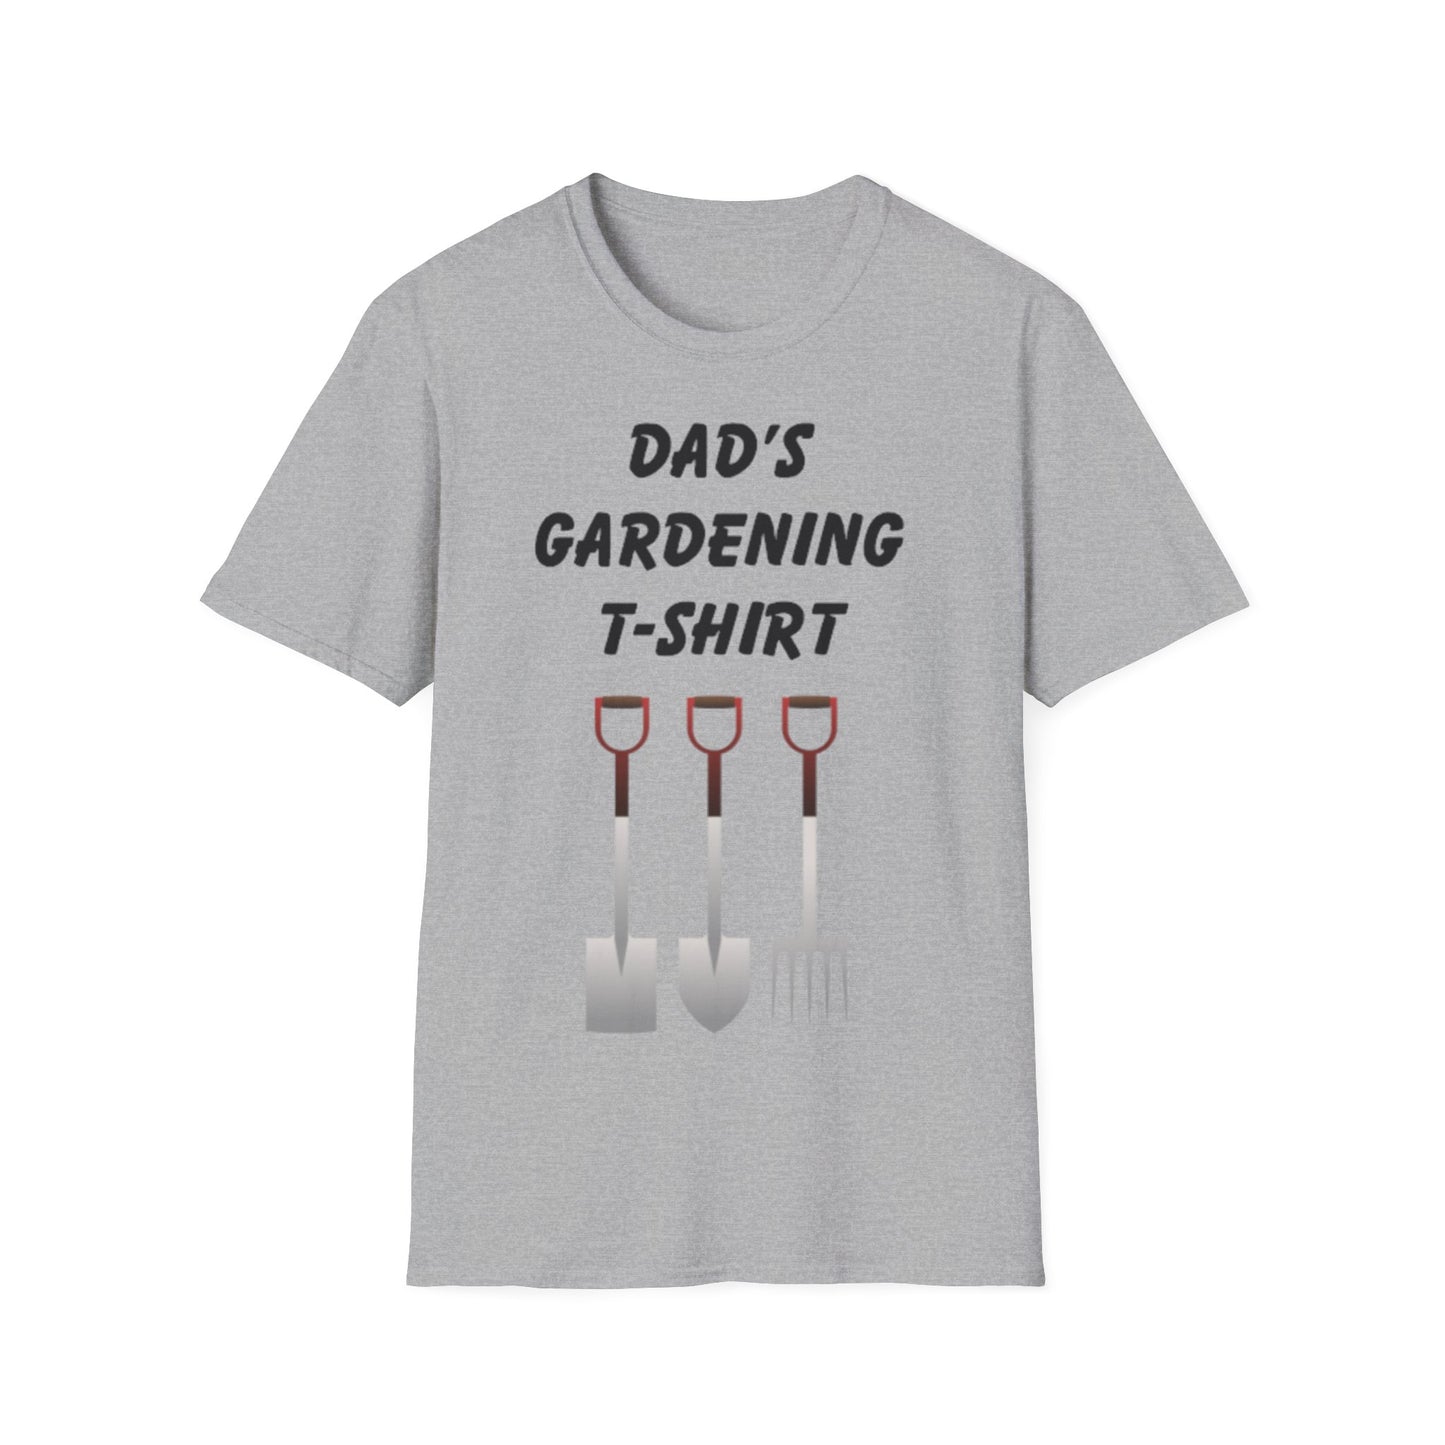 Dad's Gardening T-shirt Father's Day T-Shirt